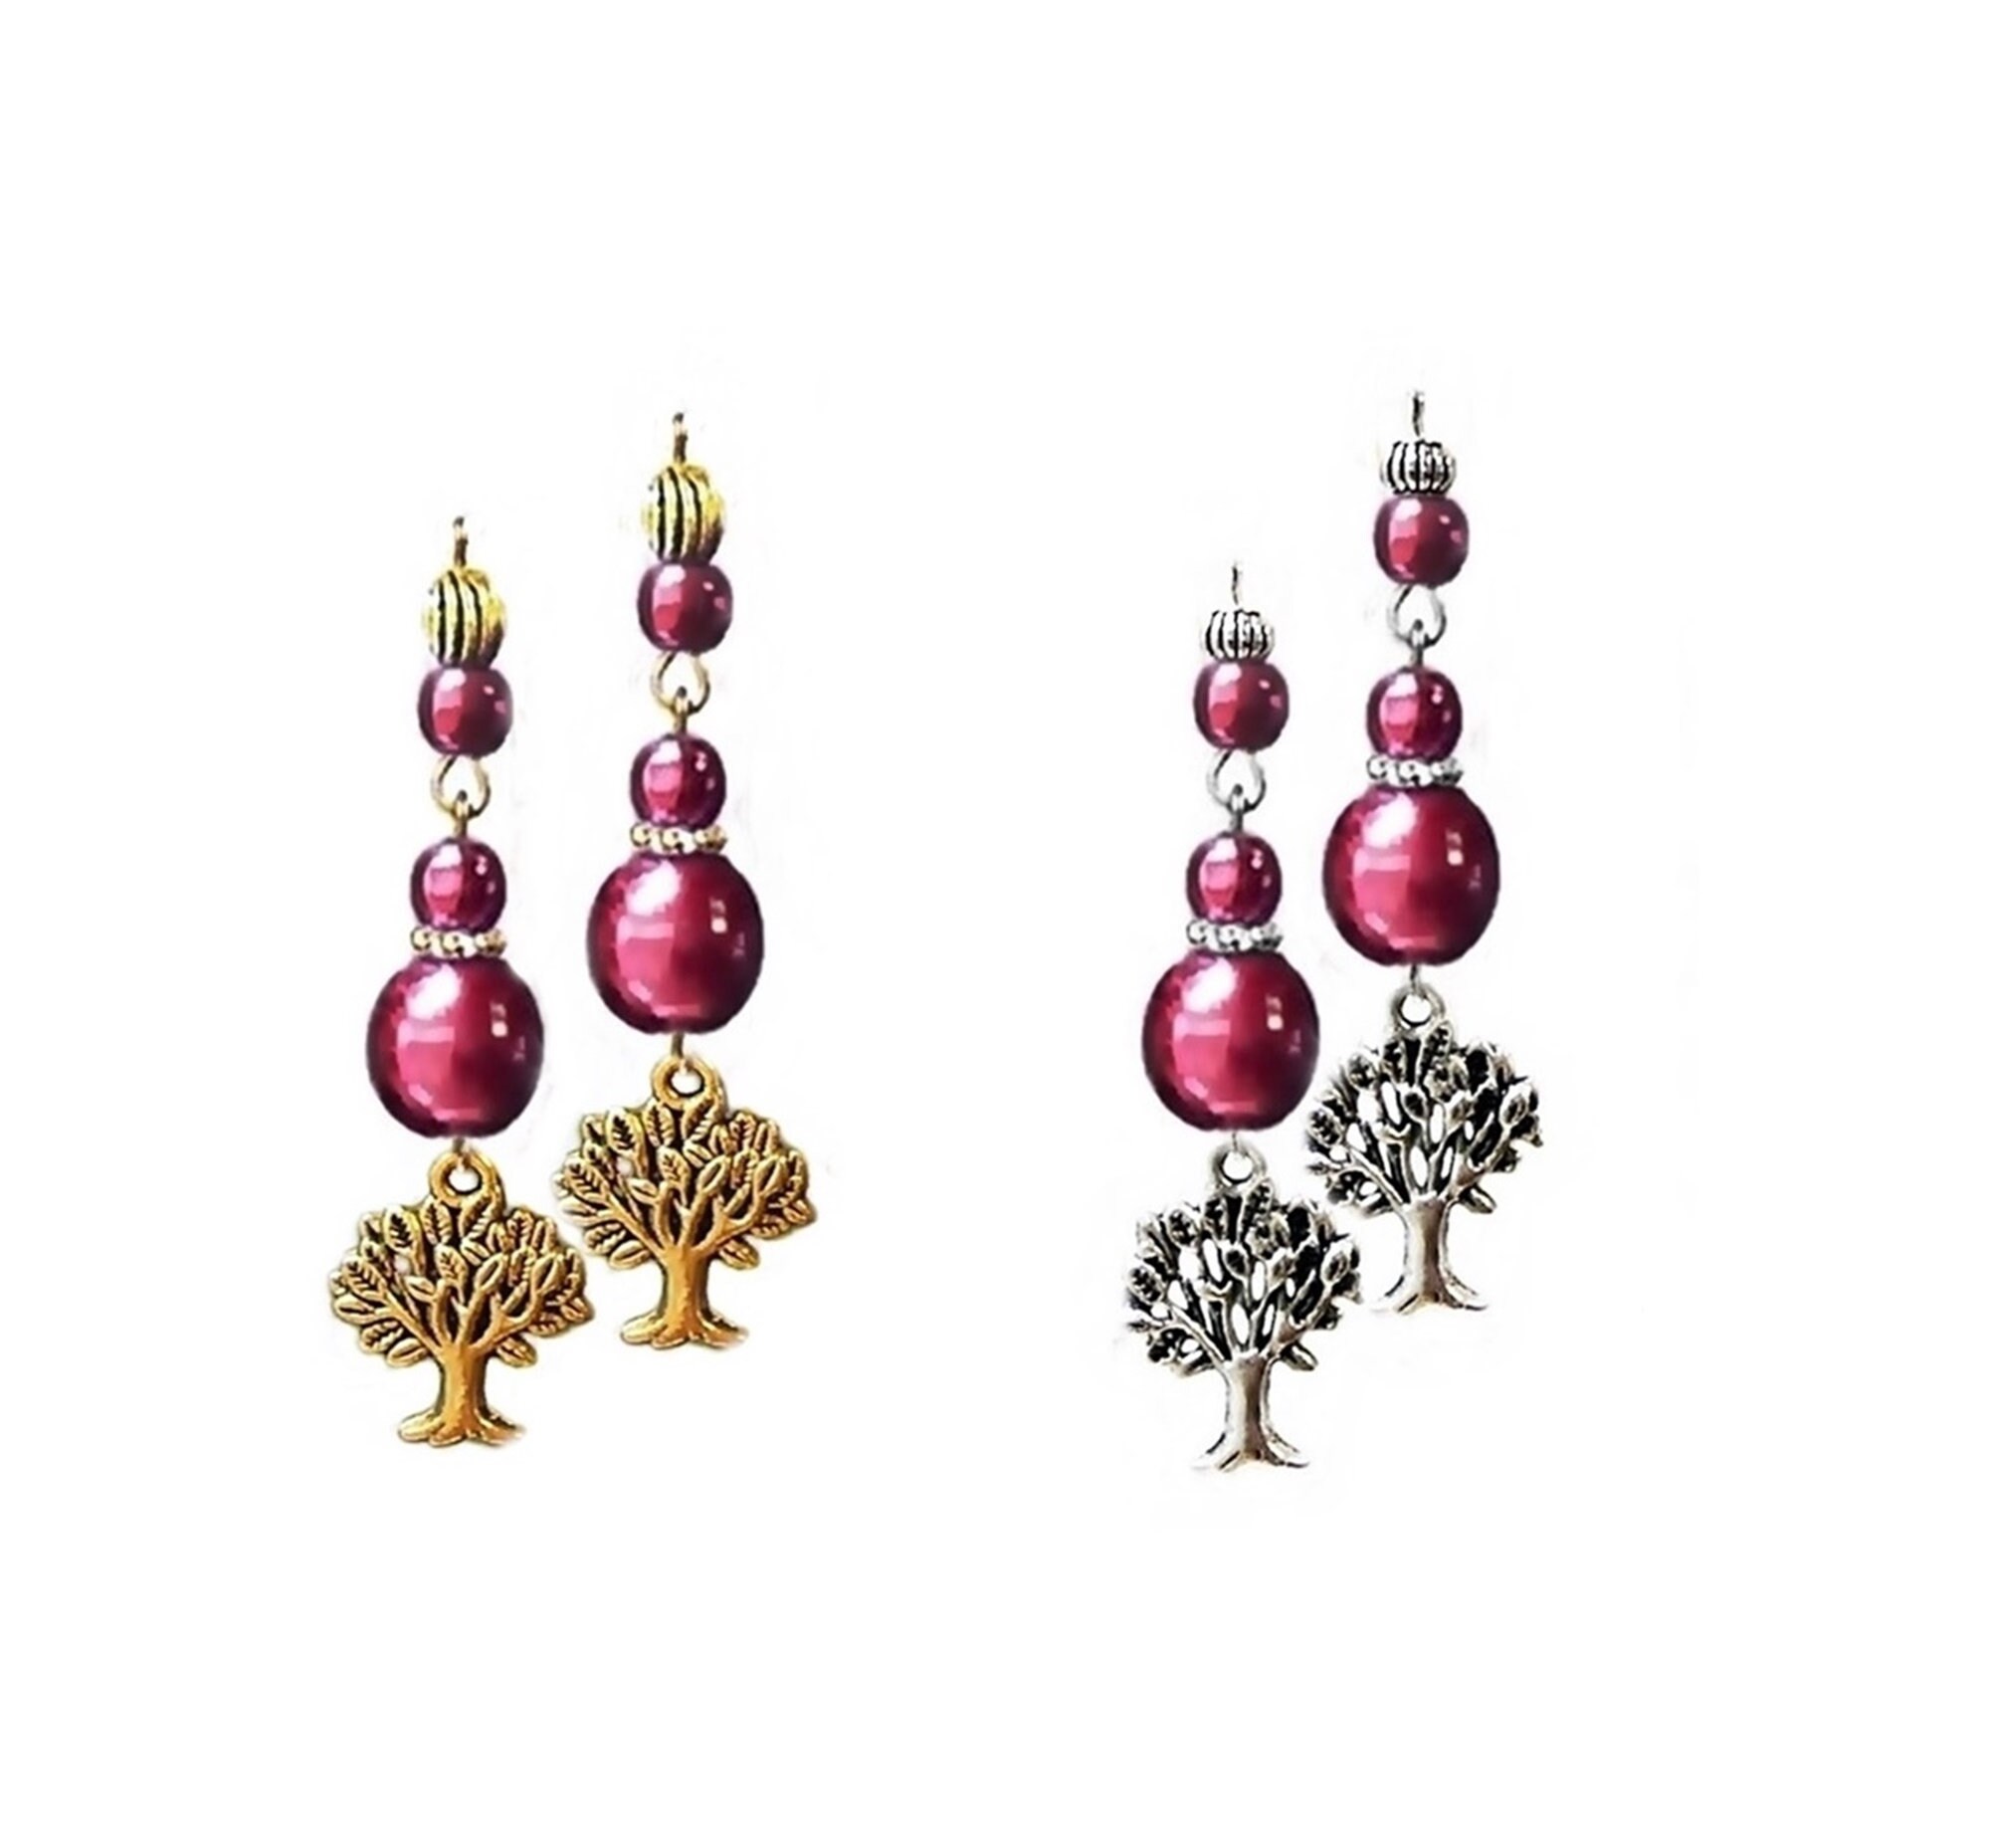 Earrings Tree of Life charm silver choose color pearl clip on or pierced gold 